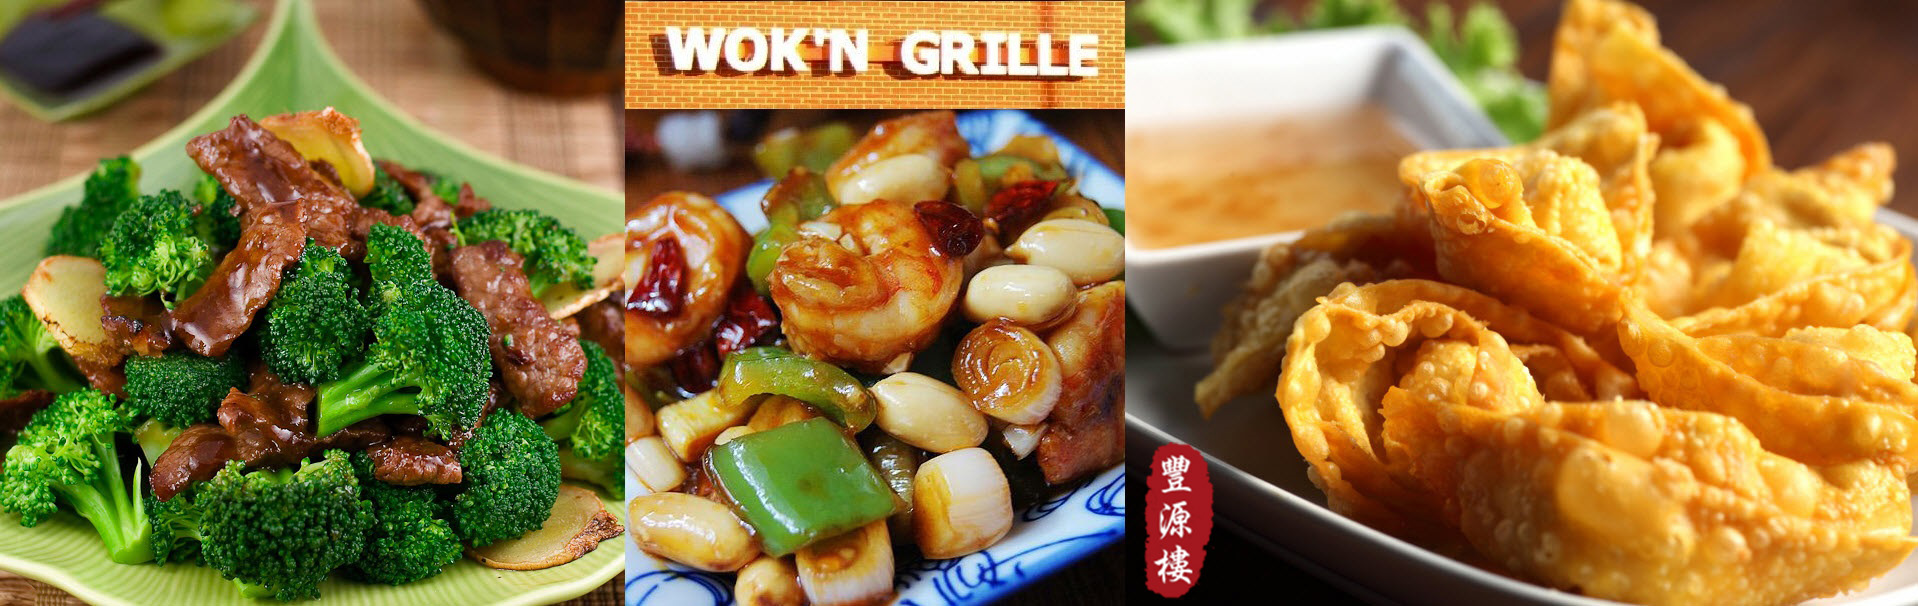 Your favorite Chinese food at Wok'n Grille Chinese